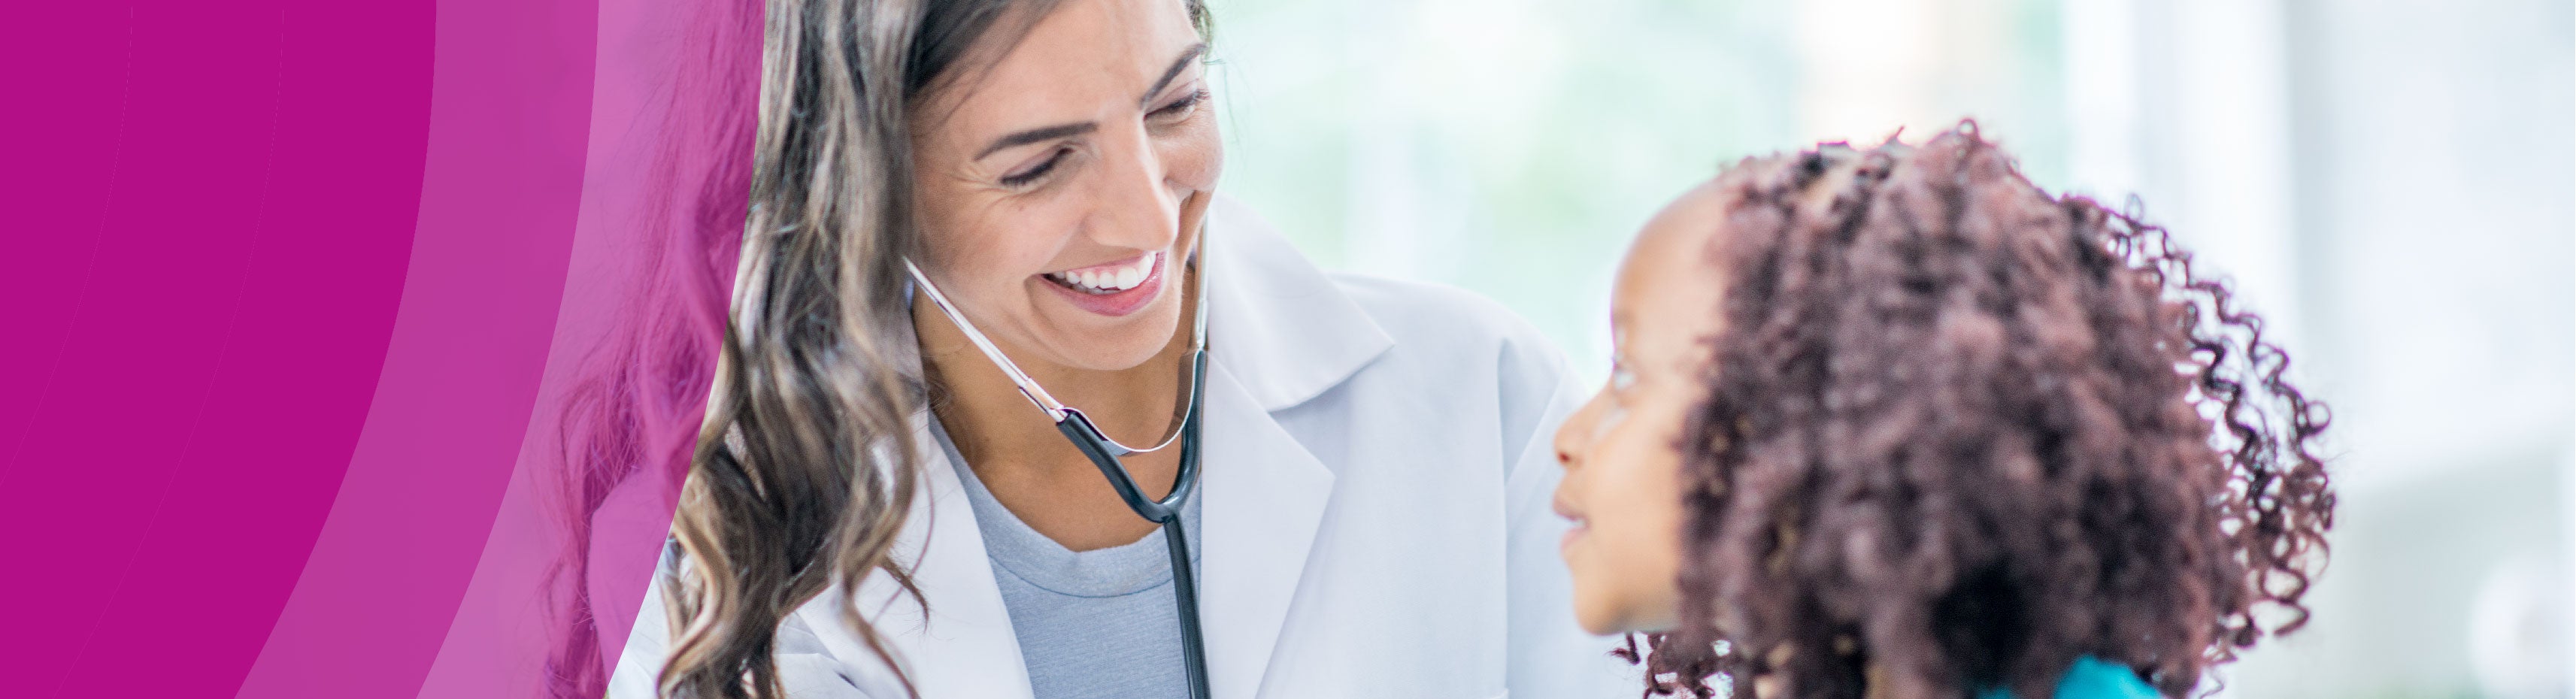 Healthcare worker and and young girl smiling at each other